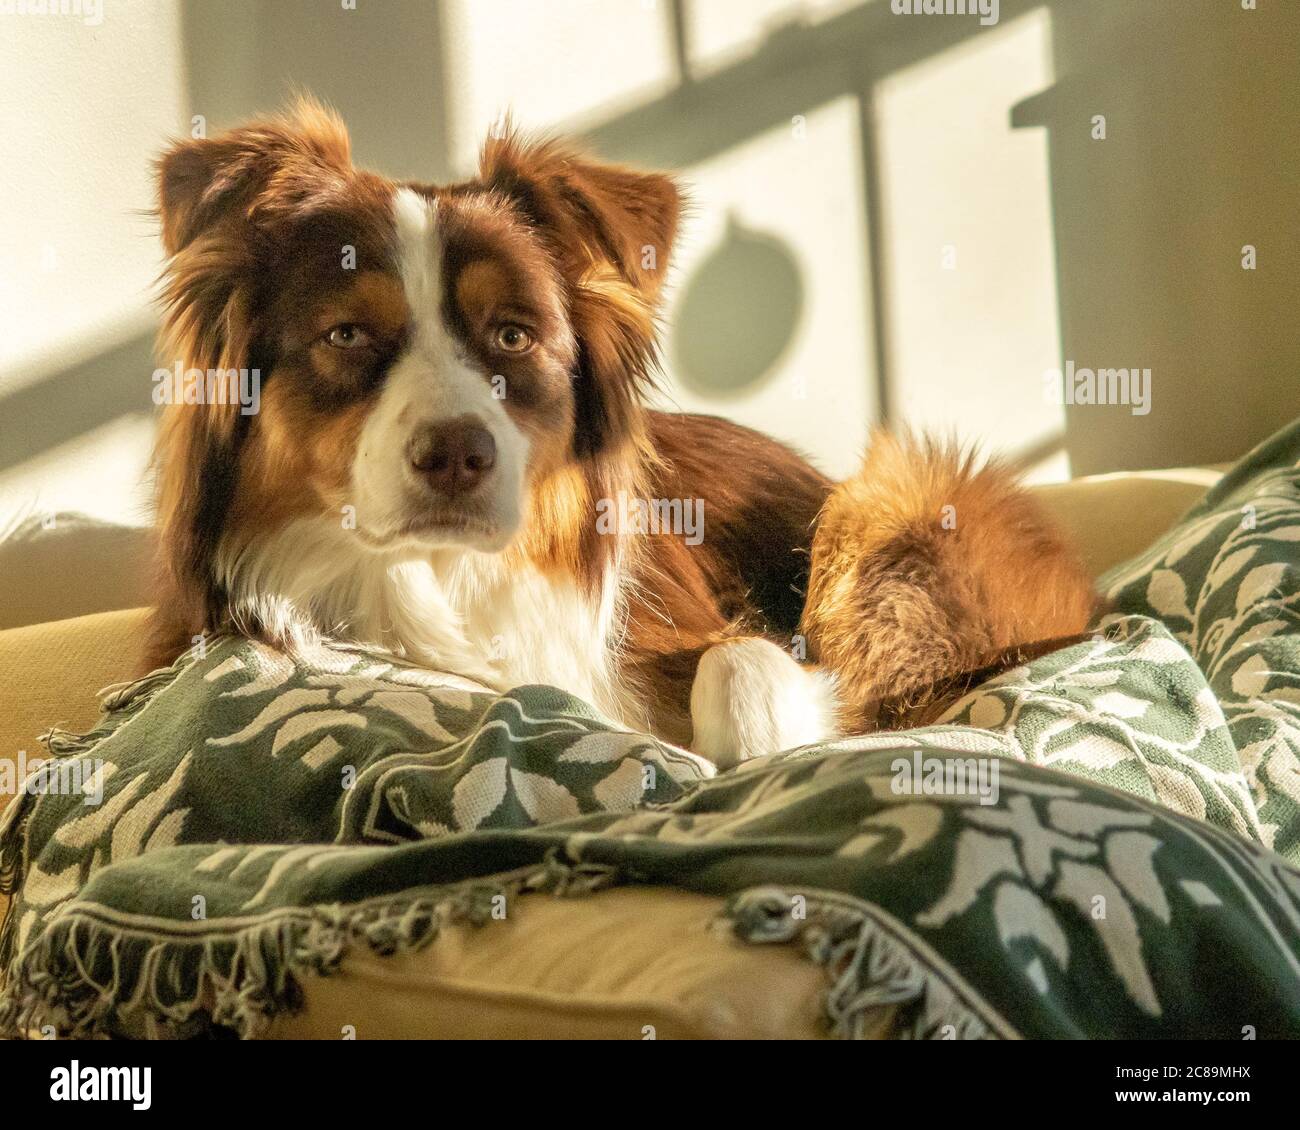 A Red Australian Shepherd laying on the couch Stock Photo